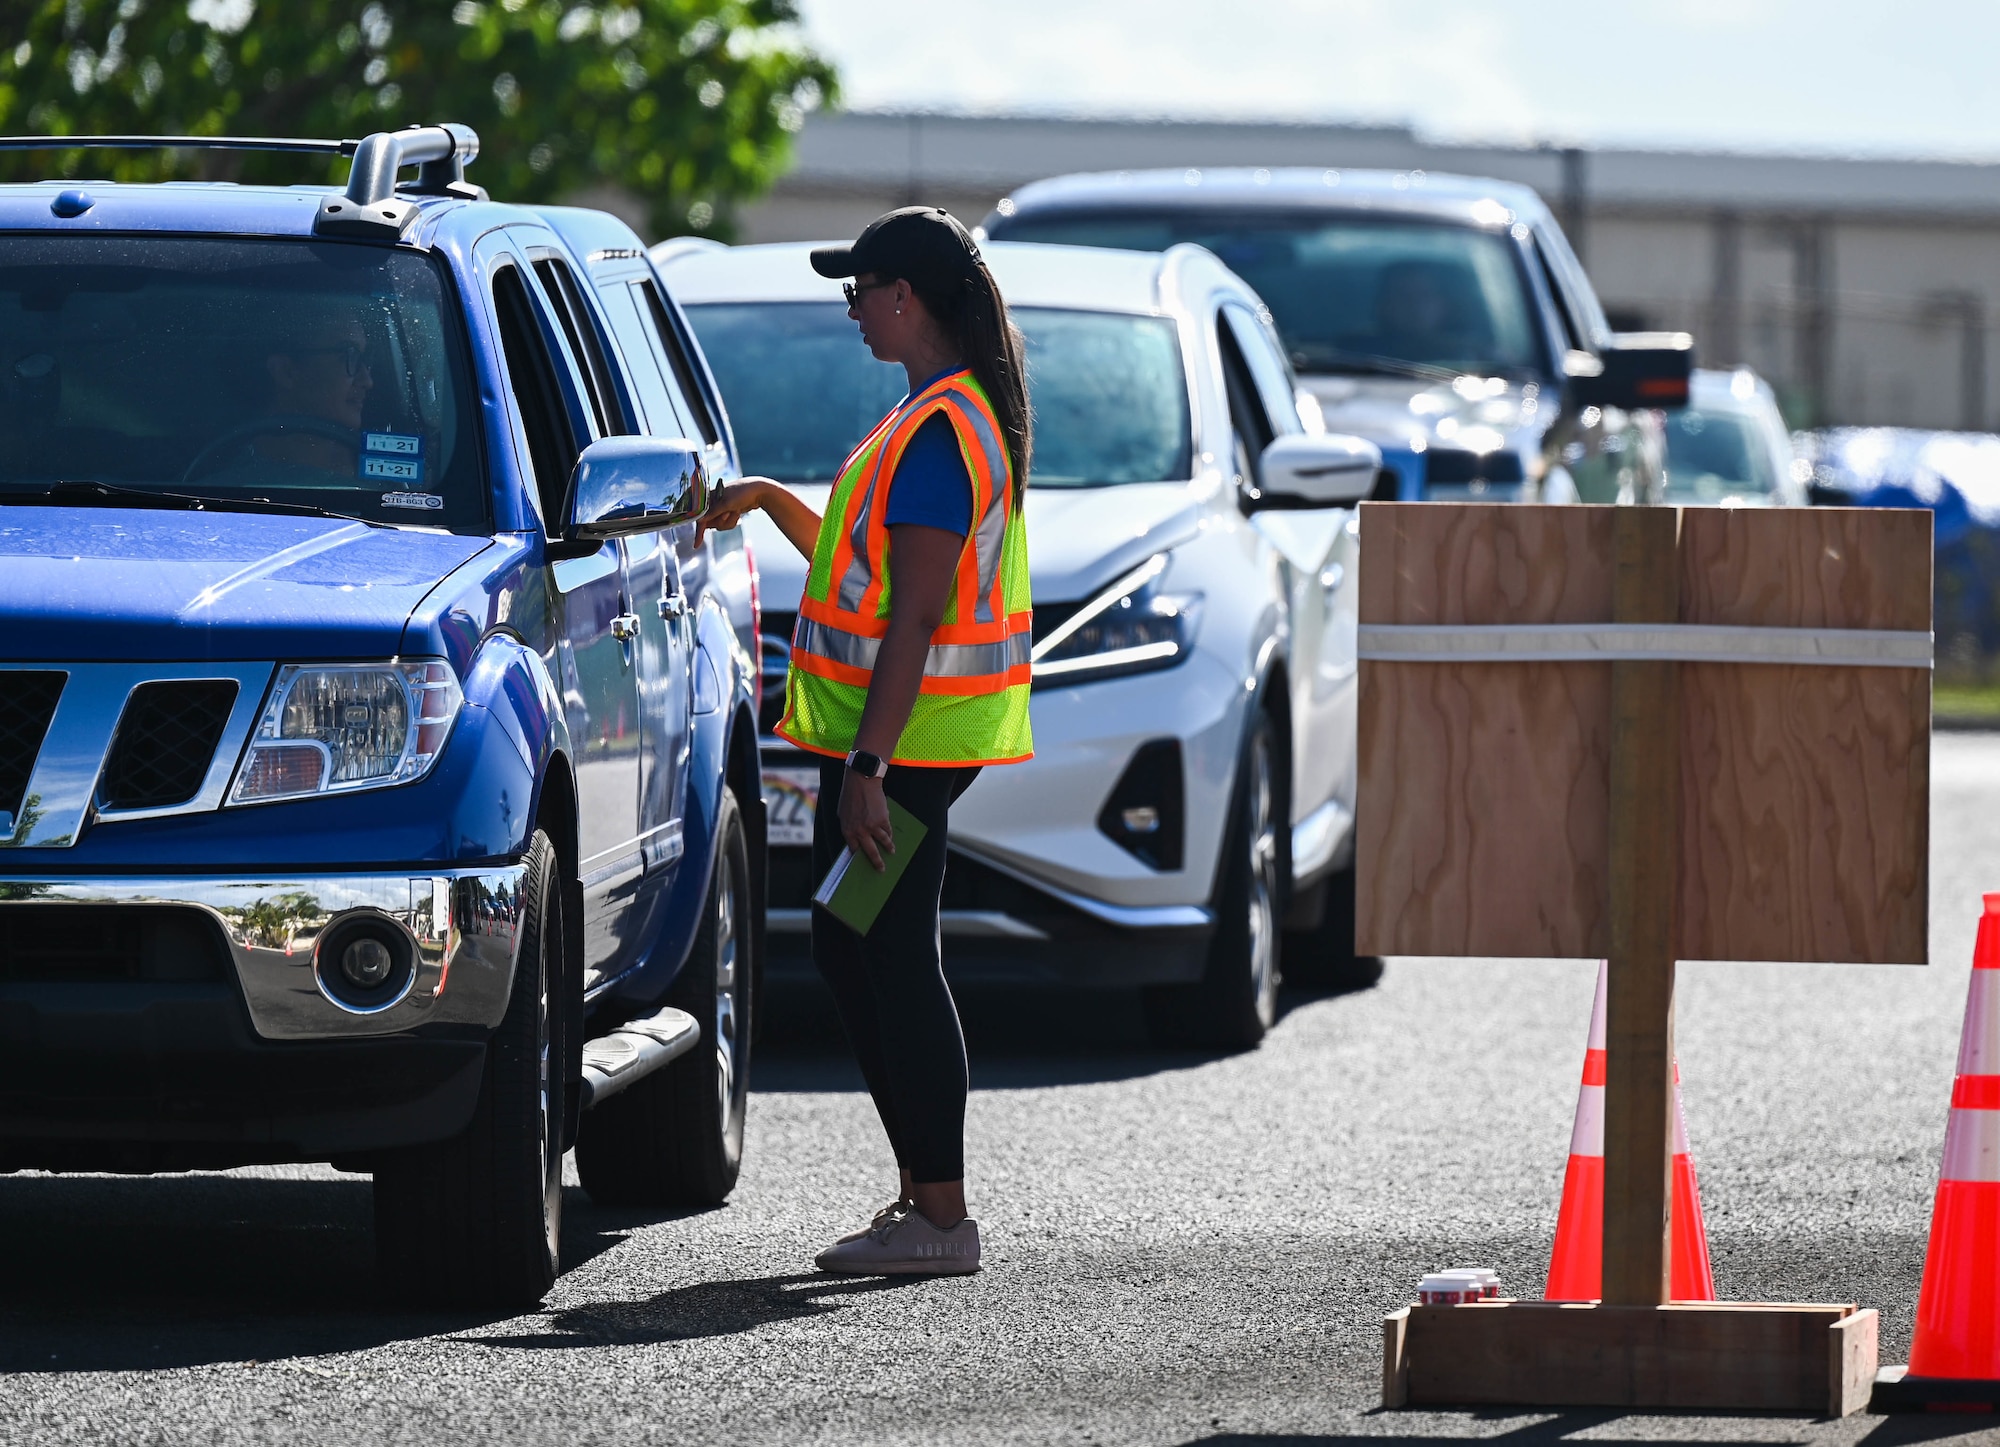 Tech. Sgt. Becca Eisenman, 65 Airlift Squadron flight attendant, inspects identification cards and confirms visitors’ residencies while managing a water distribution point at the Hickam Makai Recreation Center at Joint Base Pearl Harbor-Hickam, Hawaii, Dec. 2, 2021. The water distribution point distributes bottled water from 8 a.m. to 8 p.m. to all impacted members and families. (U.S. Air Force photo by Staff Sgt. Alan Ricker)